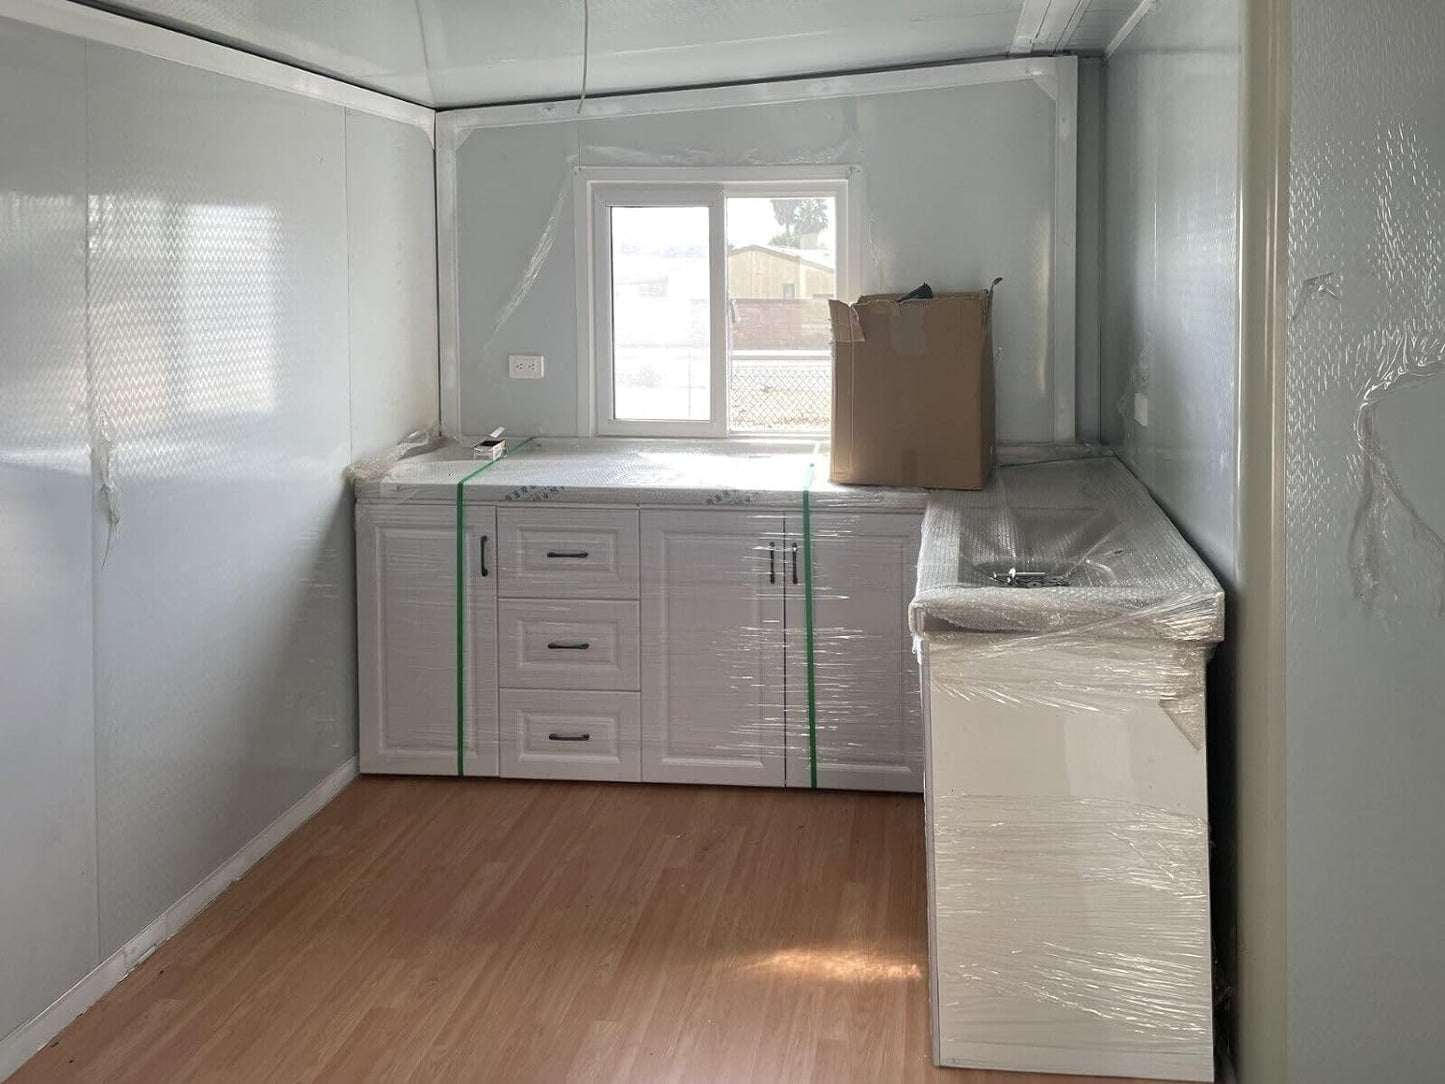 Portable Prefab Tiny Home19x20 ft Mobile Expandable House for Versatile Use, Including Hotel, Office, Shop, and More, with Restroom Included (with Restroom)